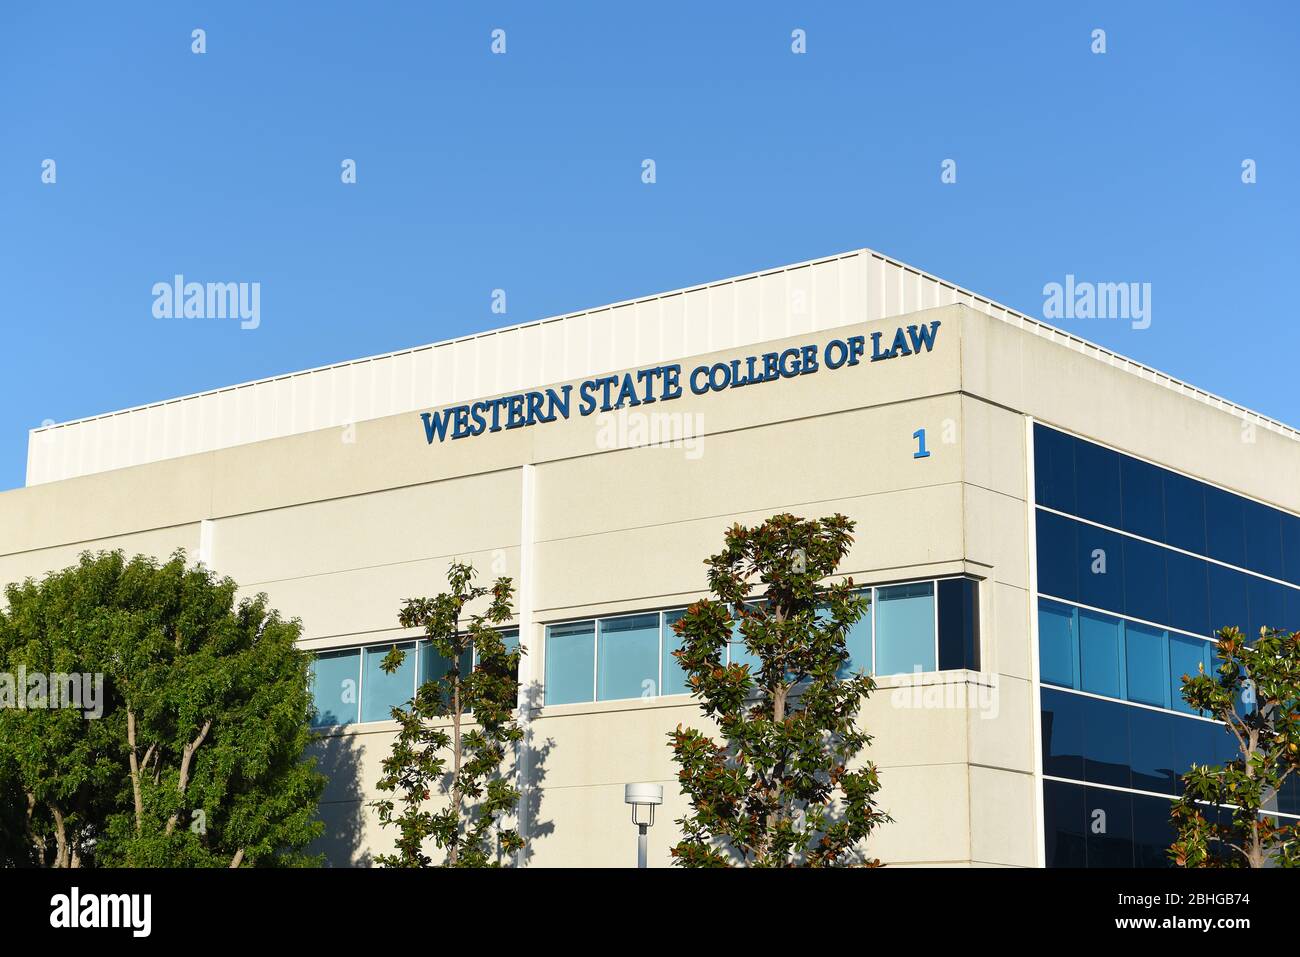 IRVINE, CALIFORNIA - 25 APRIL 2020: Closeup of the Western State College of Law, Irvine campus building. Stock Photo